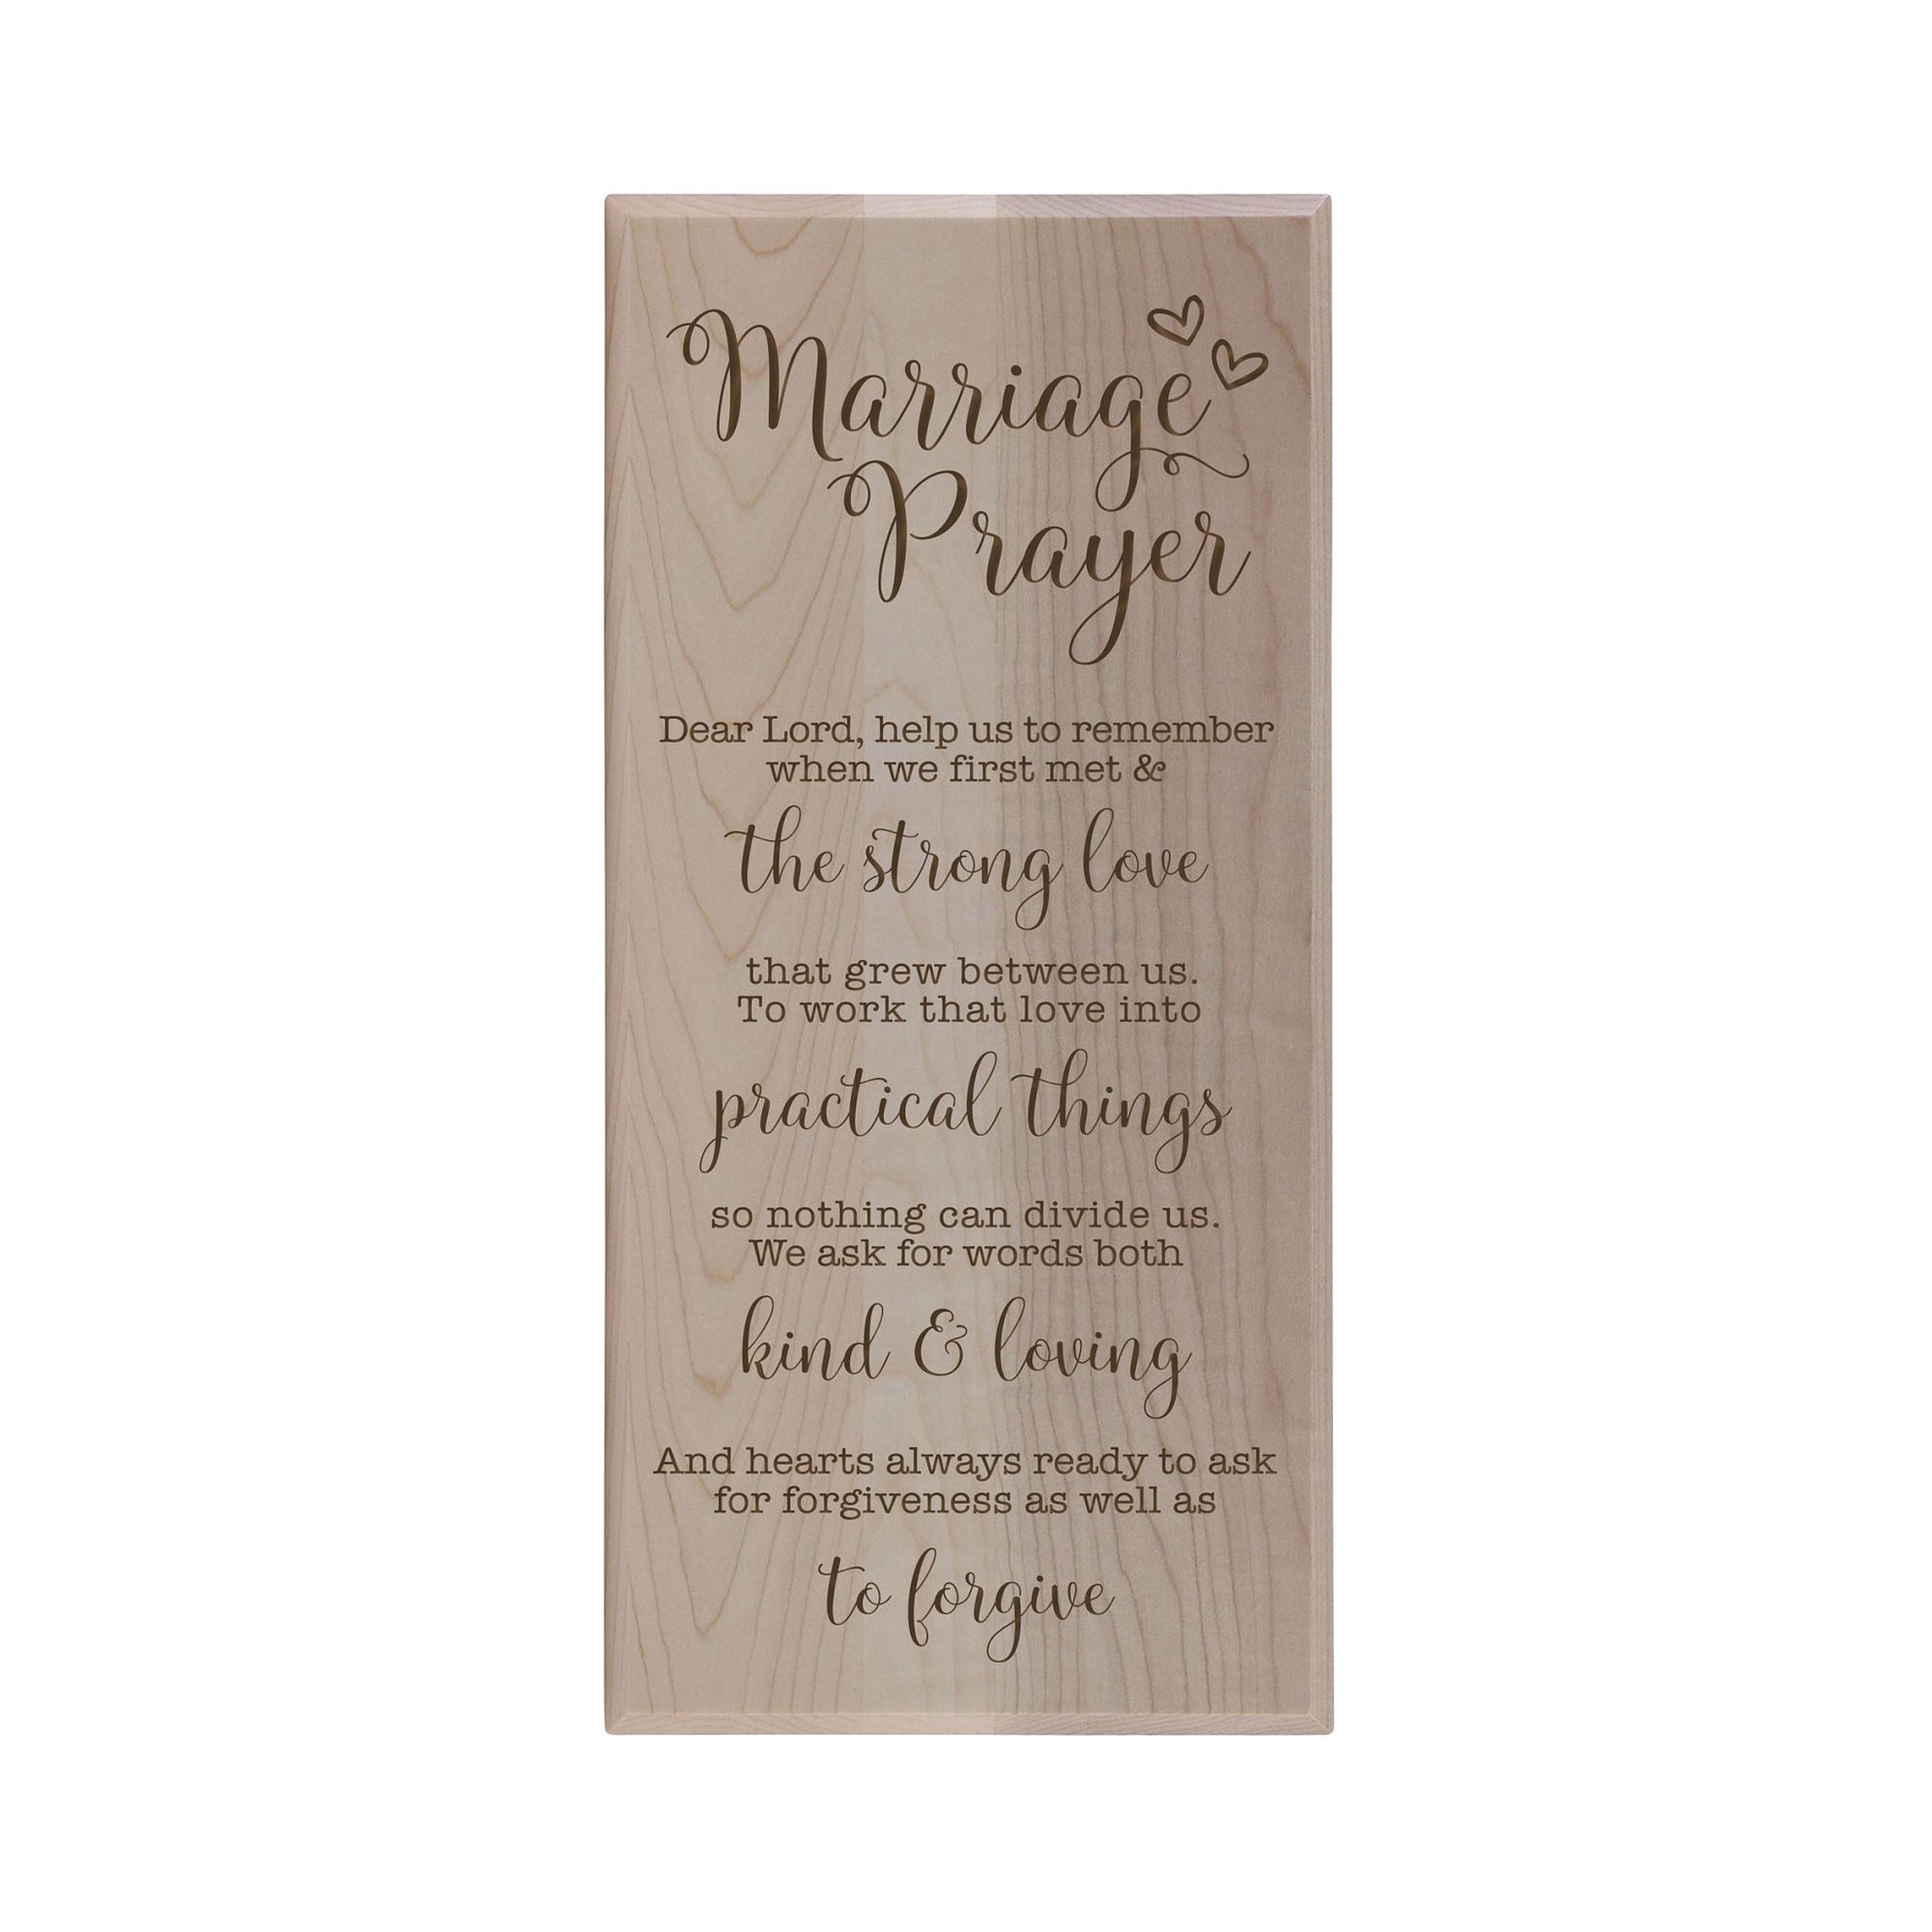 Inspirational Plaques with Prayers